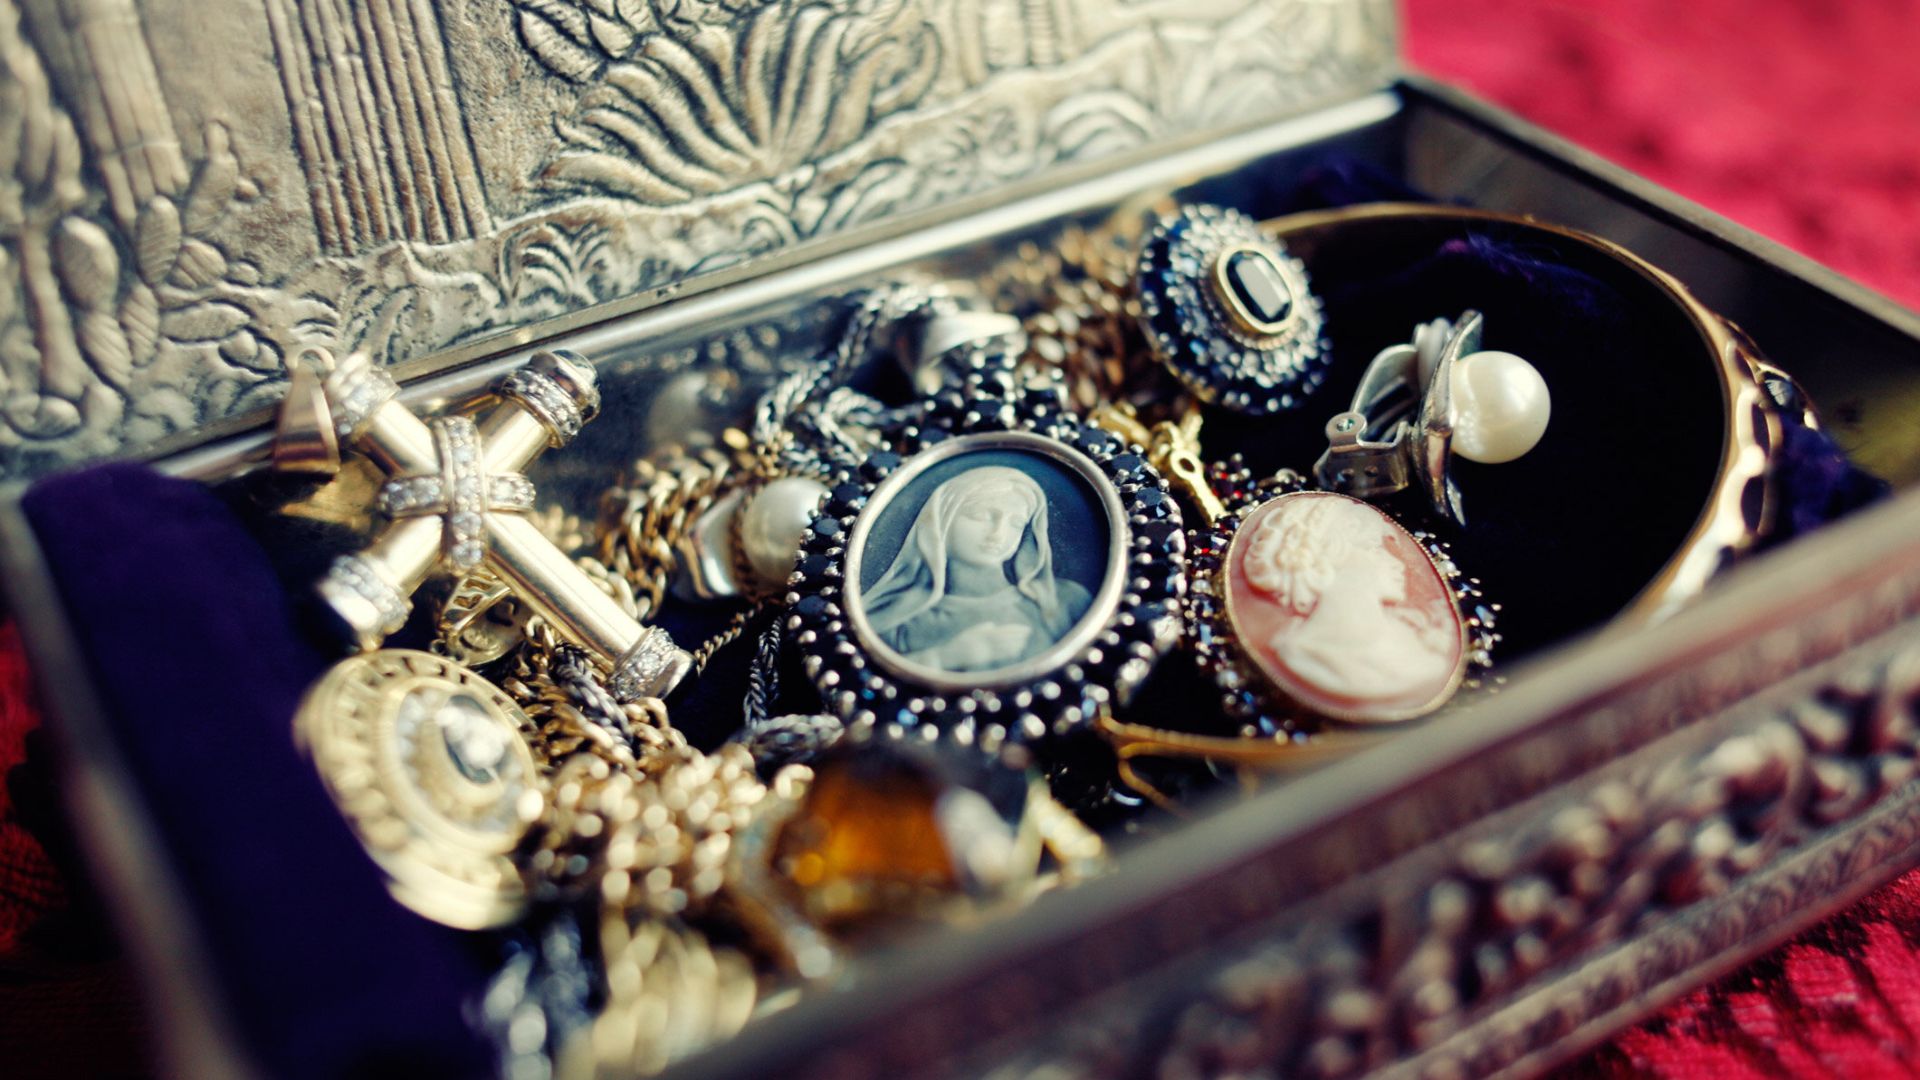 Vintage Collector's Jewelry - The Beauty And Timelessness